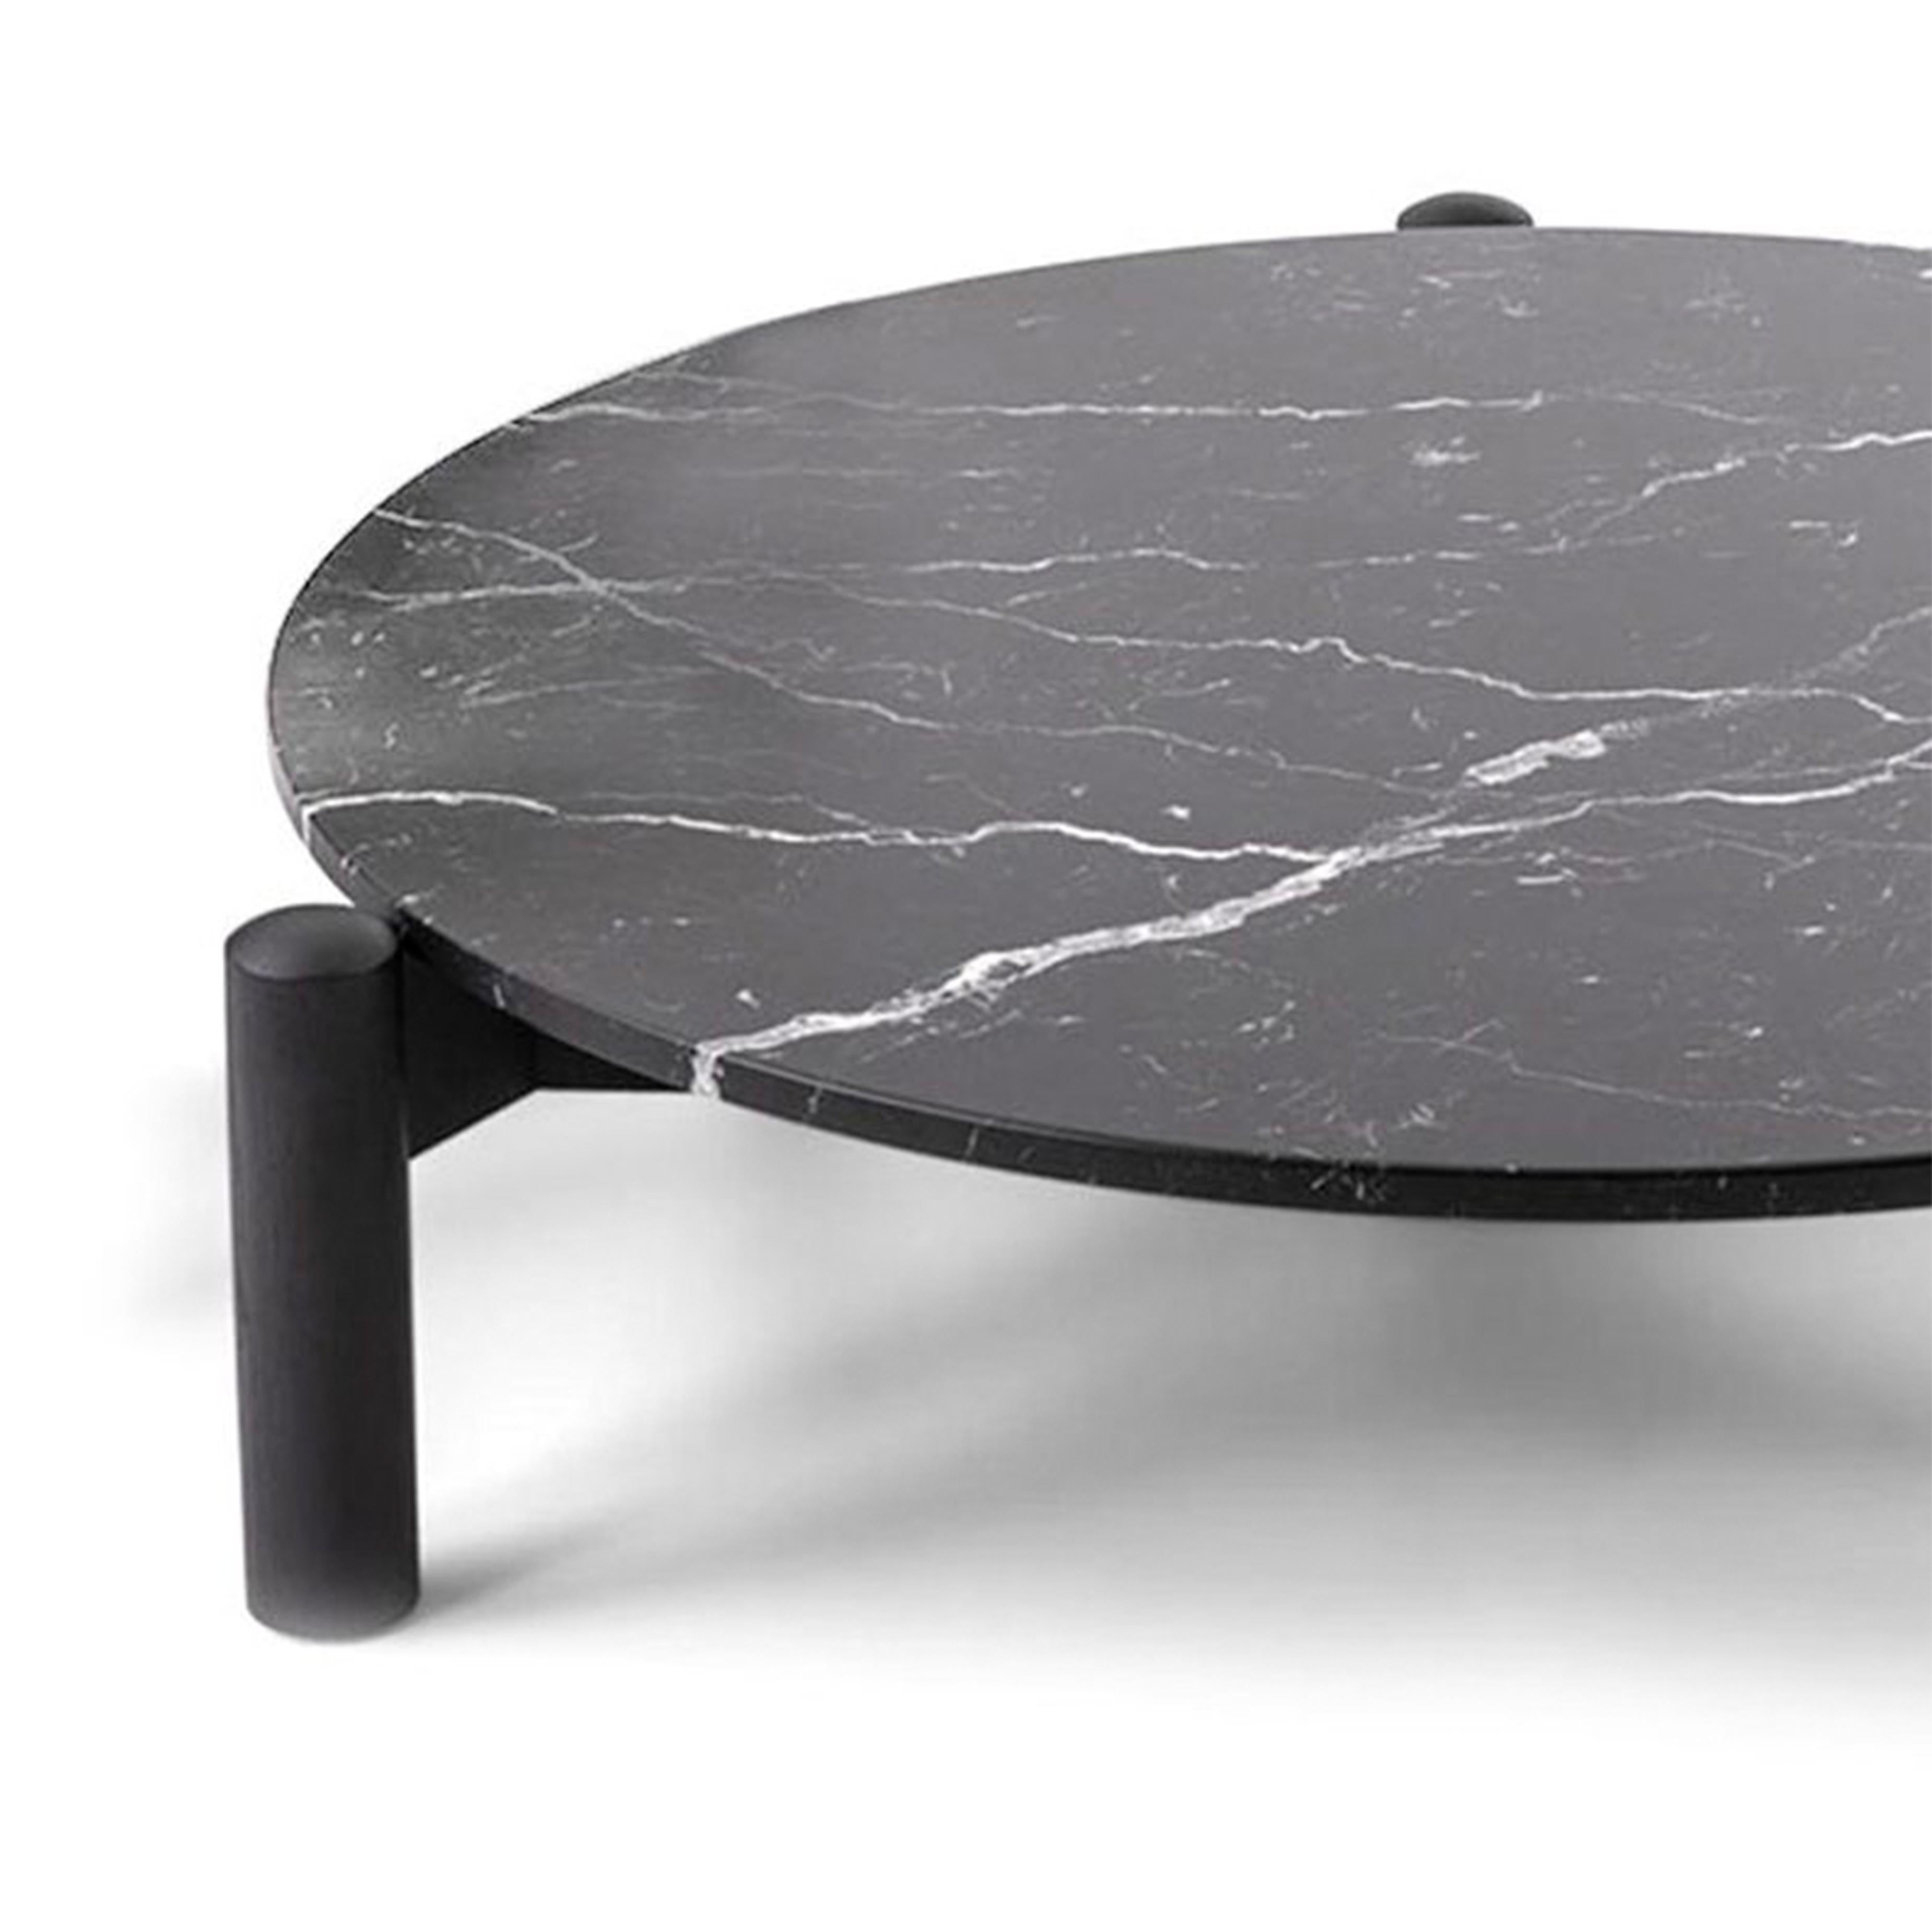 Mid Century Modern Table Black Wood and Marble by Charlotte Perriand for Cassina

Table designed by Charlotte Perriand in 1937. Relaunched in 2019.
Manufactured by Cassina in Italy.

The first model of this historic design low table was crafted in